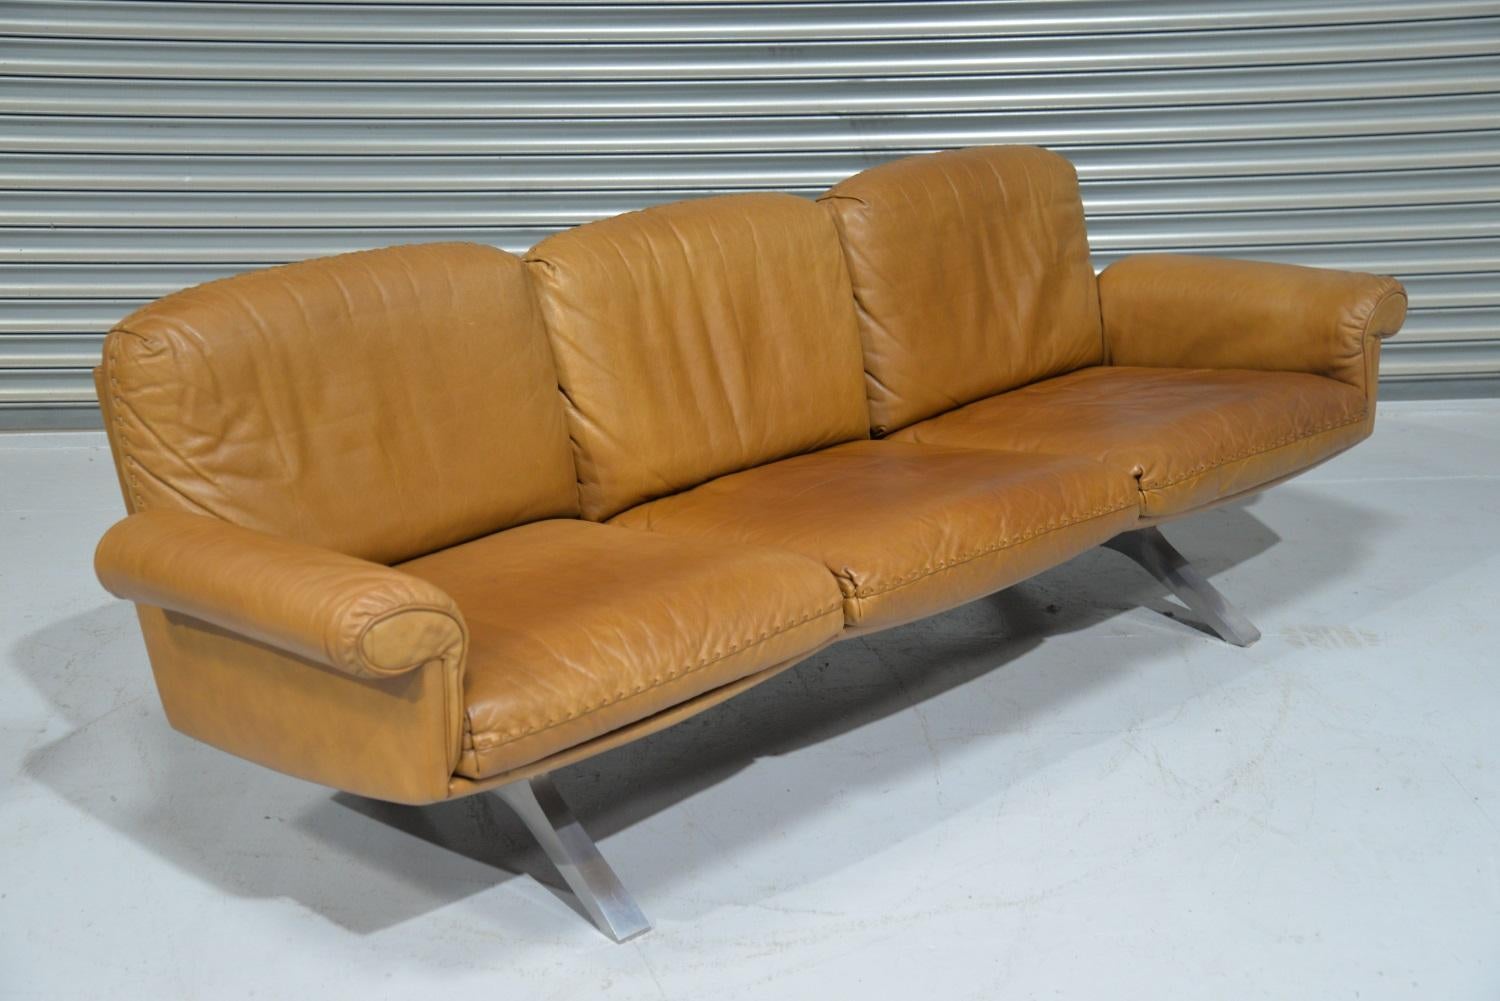 Discounted airfreight for our US Continent and International customers ( from 2 weeks door to door) 

We are delighted to bring to you a vintage de Sede DS 31 three-seat sofa in beautiful soft tan aniline leather with superb whipstitch edge